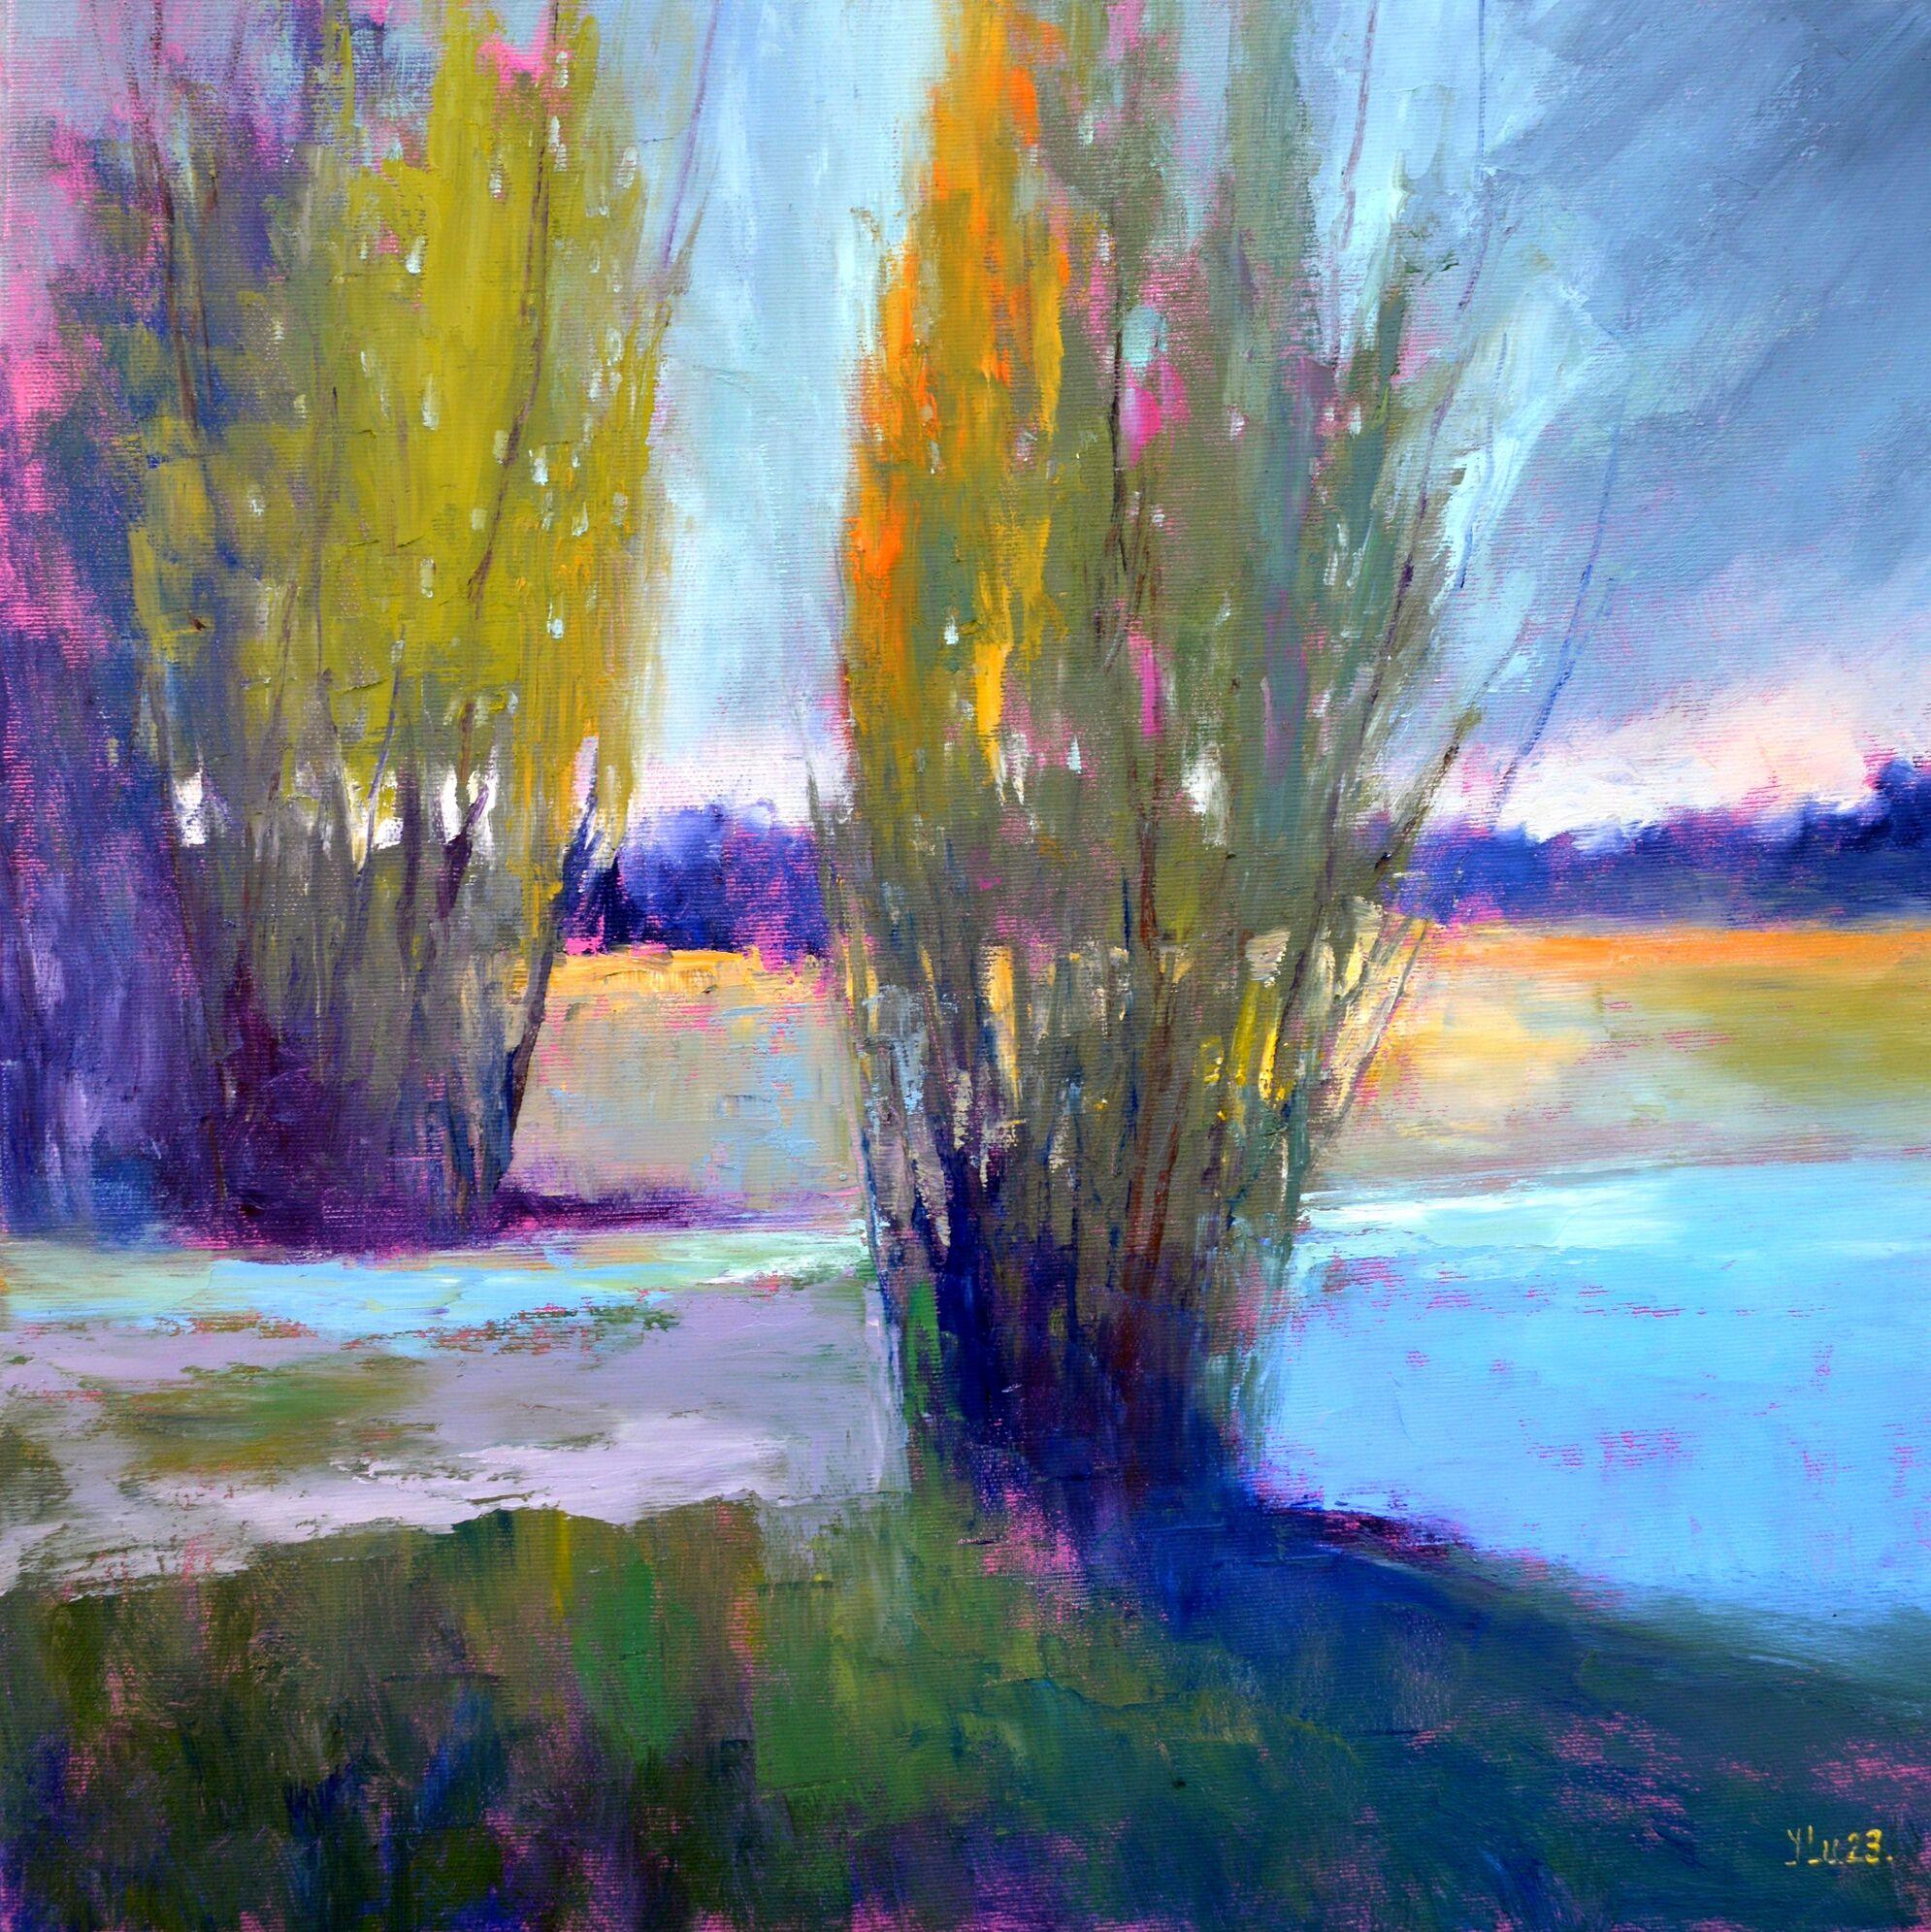 Elena Lukina Landscape Painting - Evening colors by the river